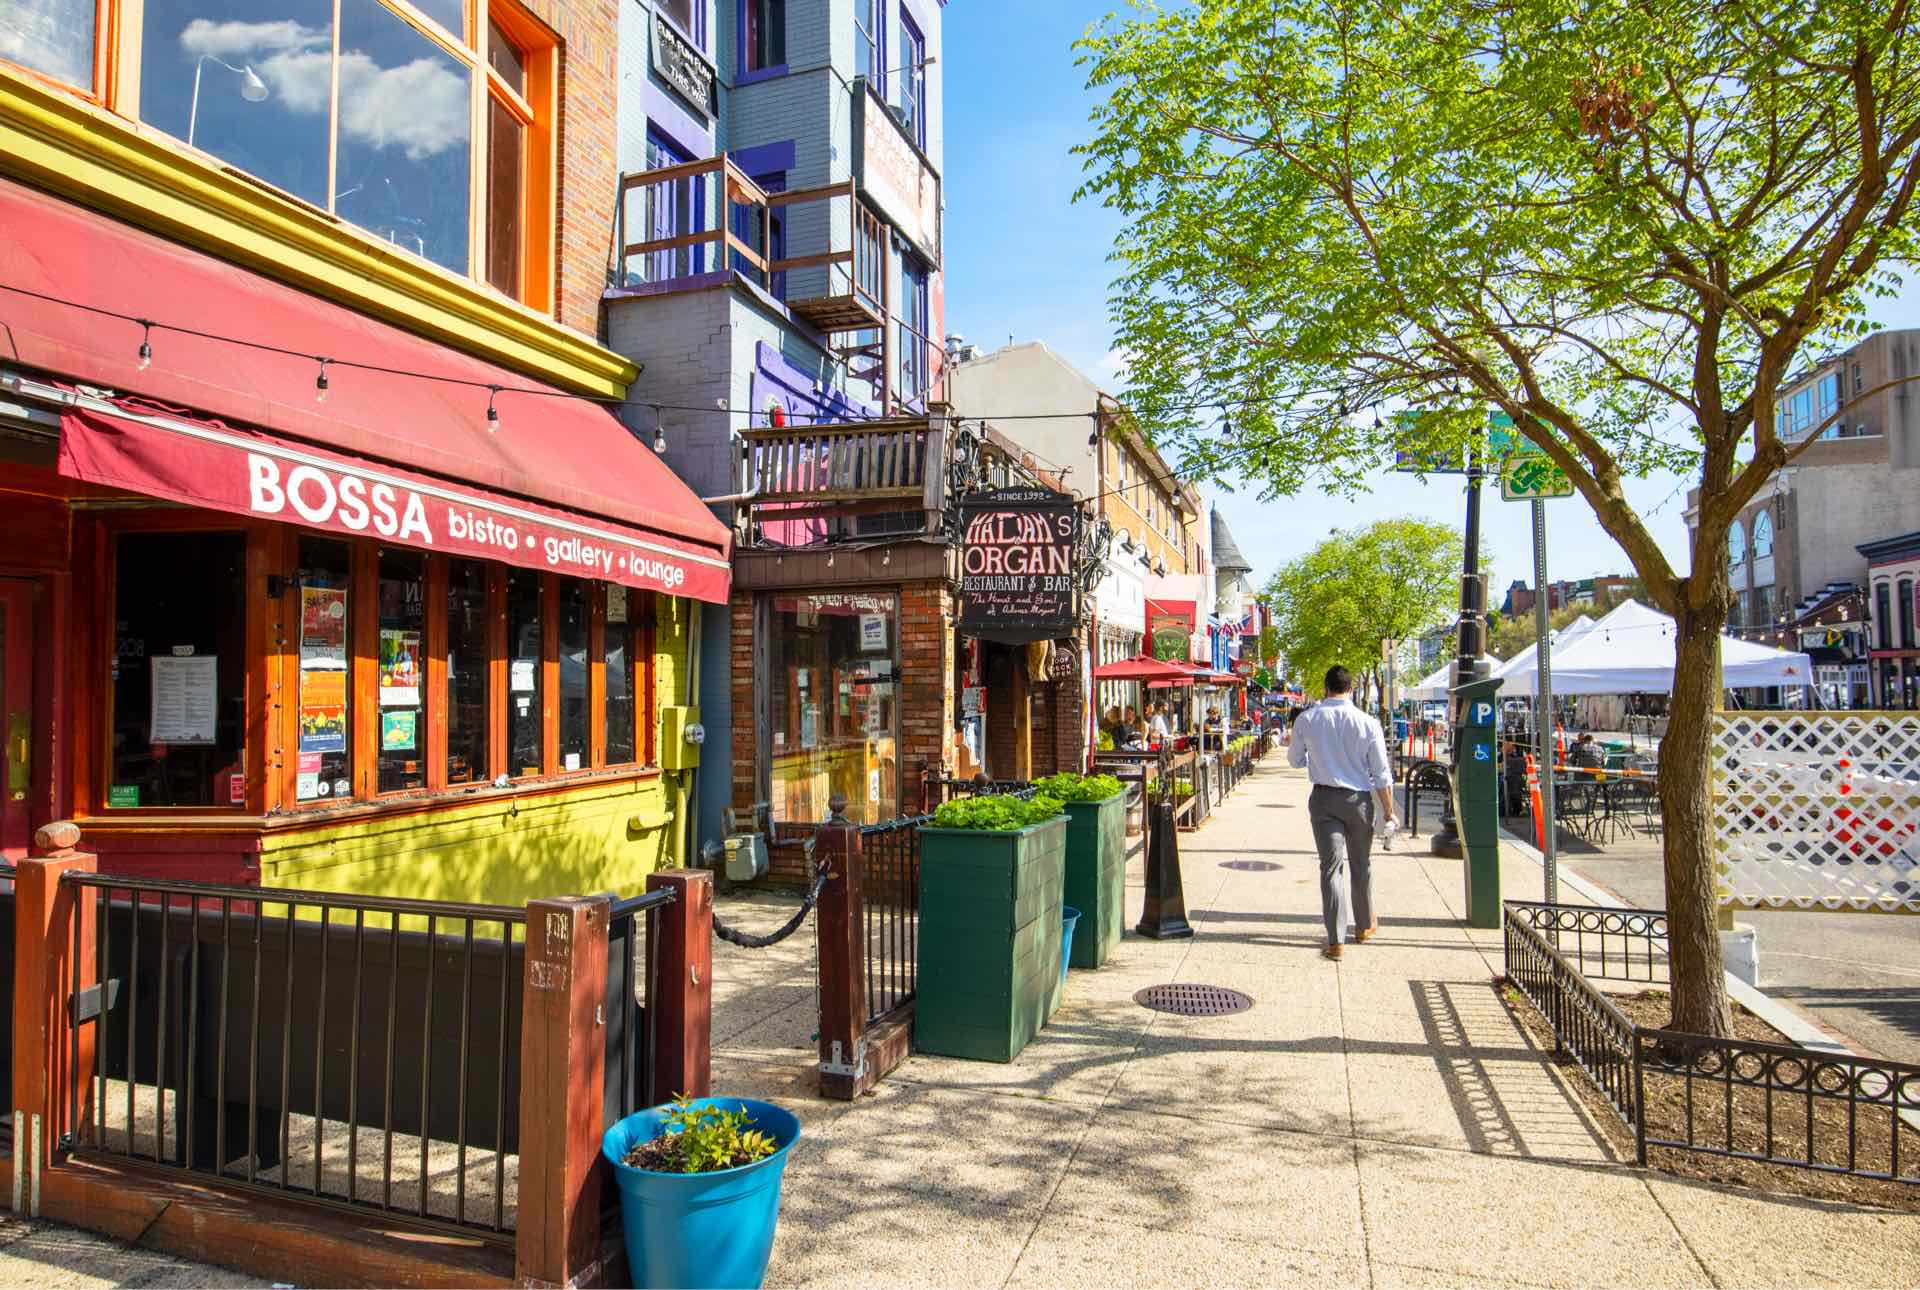 Retail, dining and entertainment in The heart of Adams Morgan 